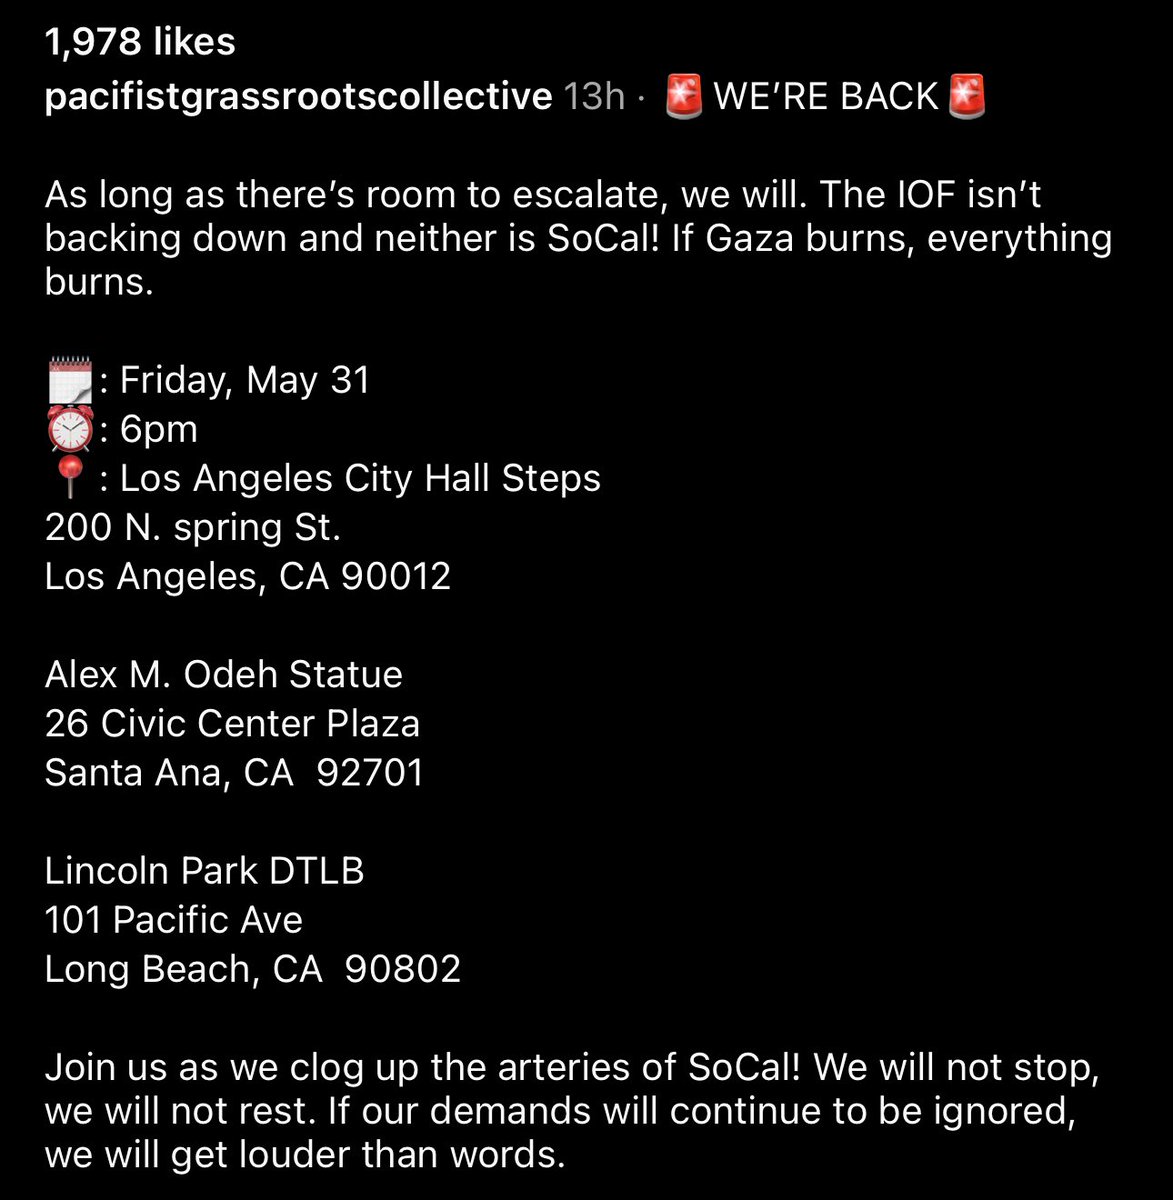 #Breaking #SantaAna #LongBeach #LosAngeles a group known as the “Pacifist Grassroots Collective” are organizing multiple protests for tomorrow titled “If Gaza Burns, SoCal Burns” in cities across LA/OC. 

The group also threatens escalation if their “demands” are ignored. @LBPD